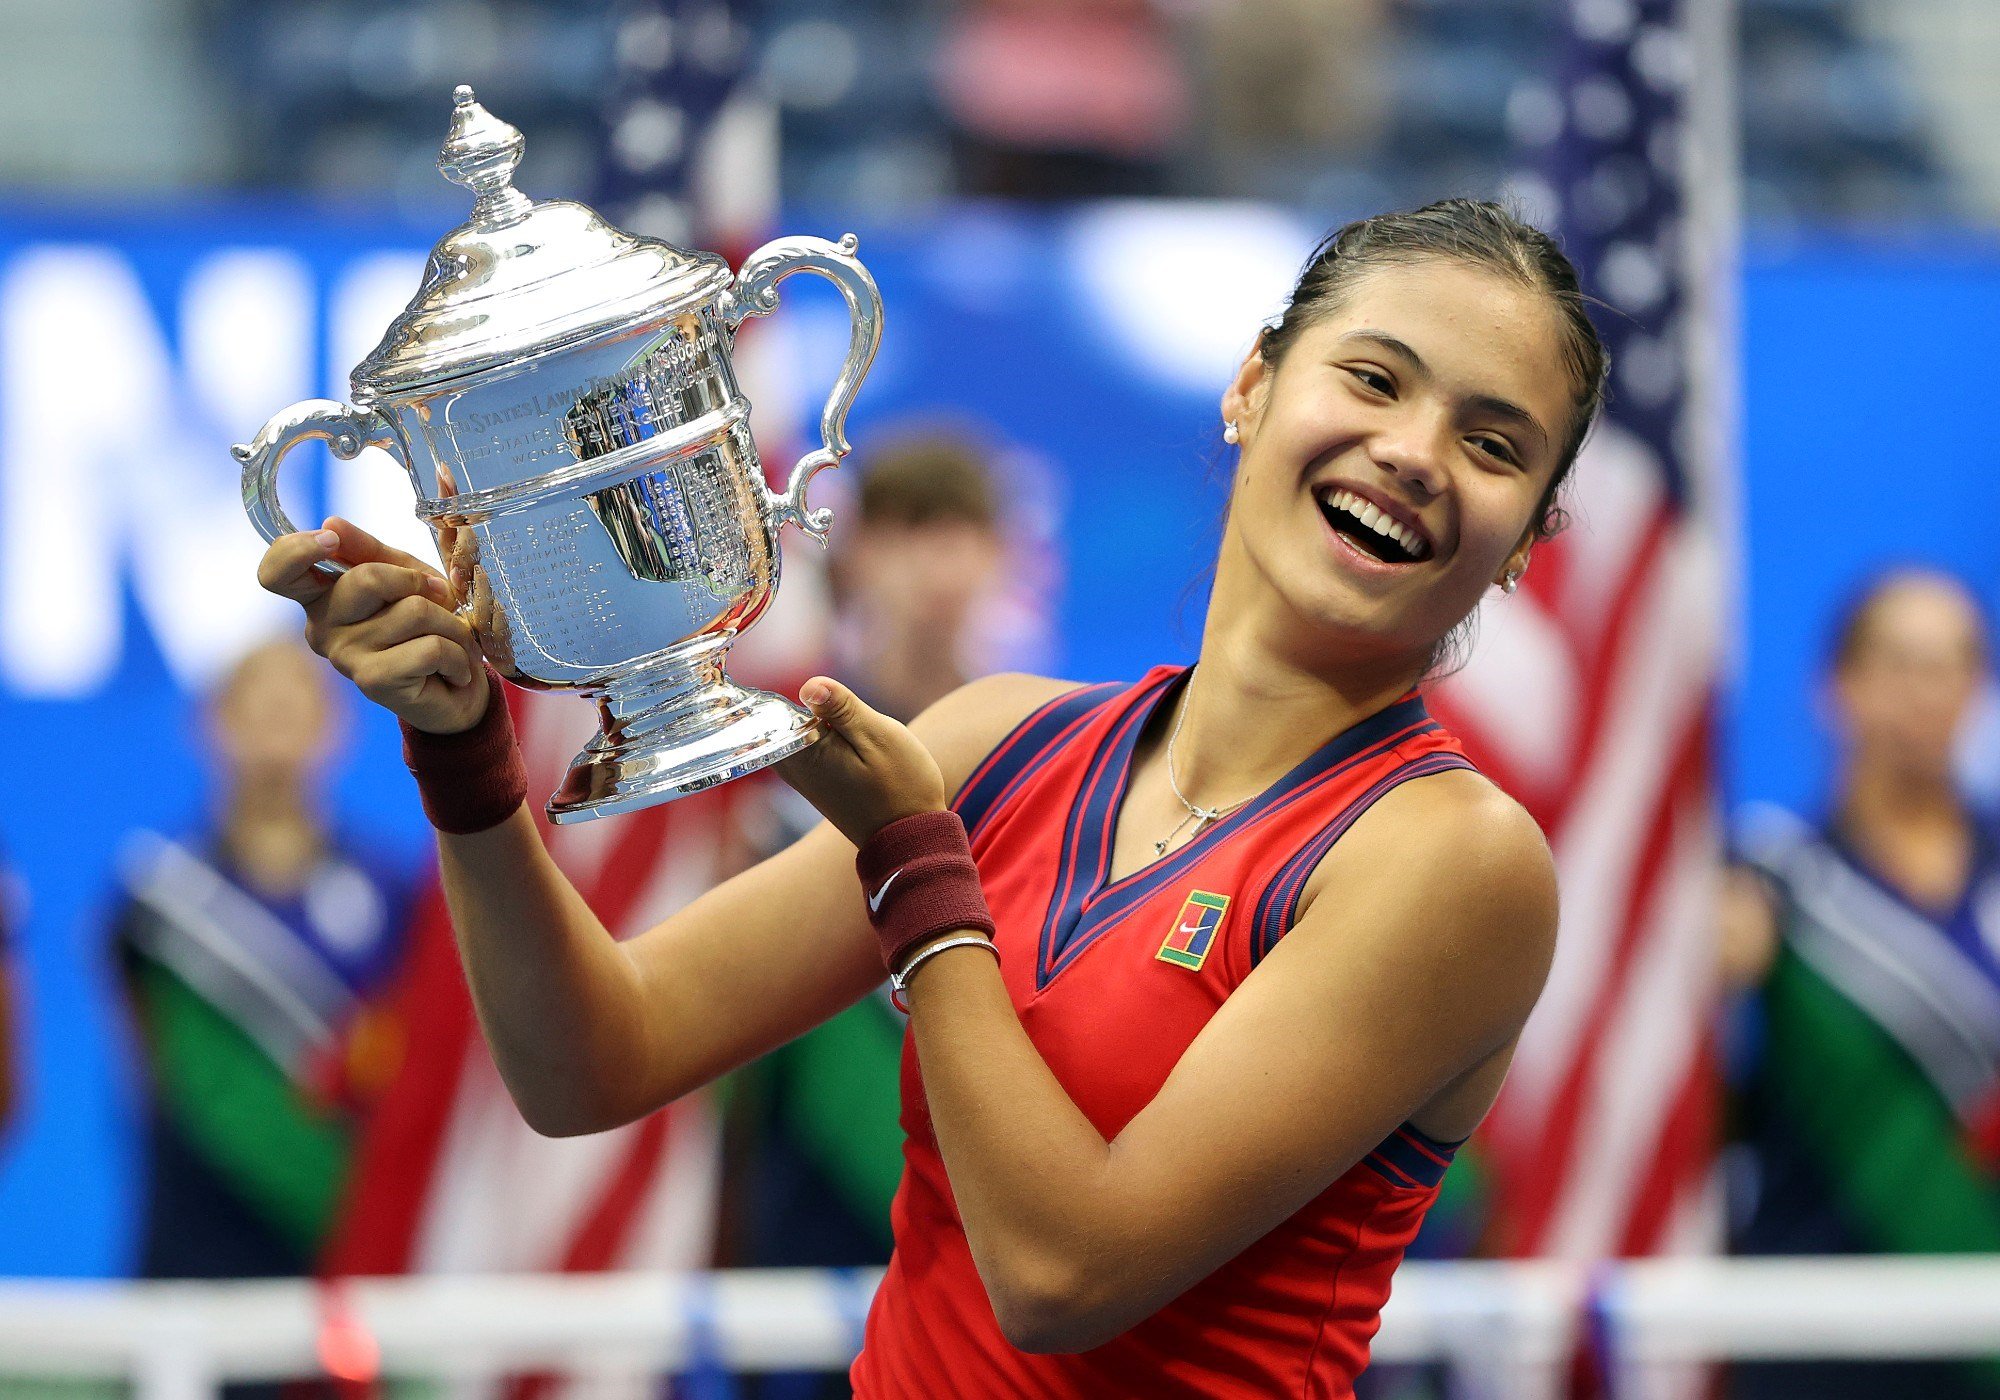 Emma Raducanu with the trophy after defeating Leylah Annie Fernandez at the Women's Singles final of the 2021 US Open